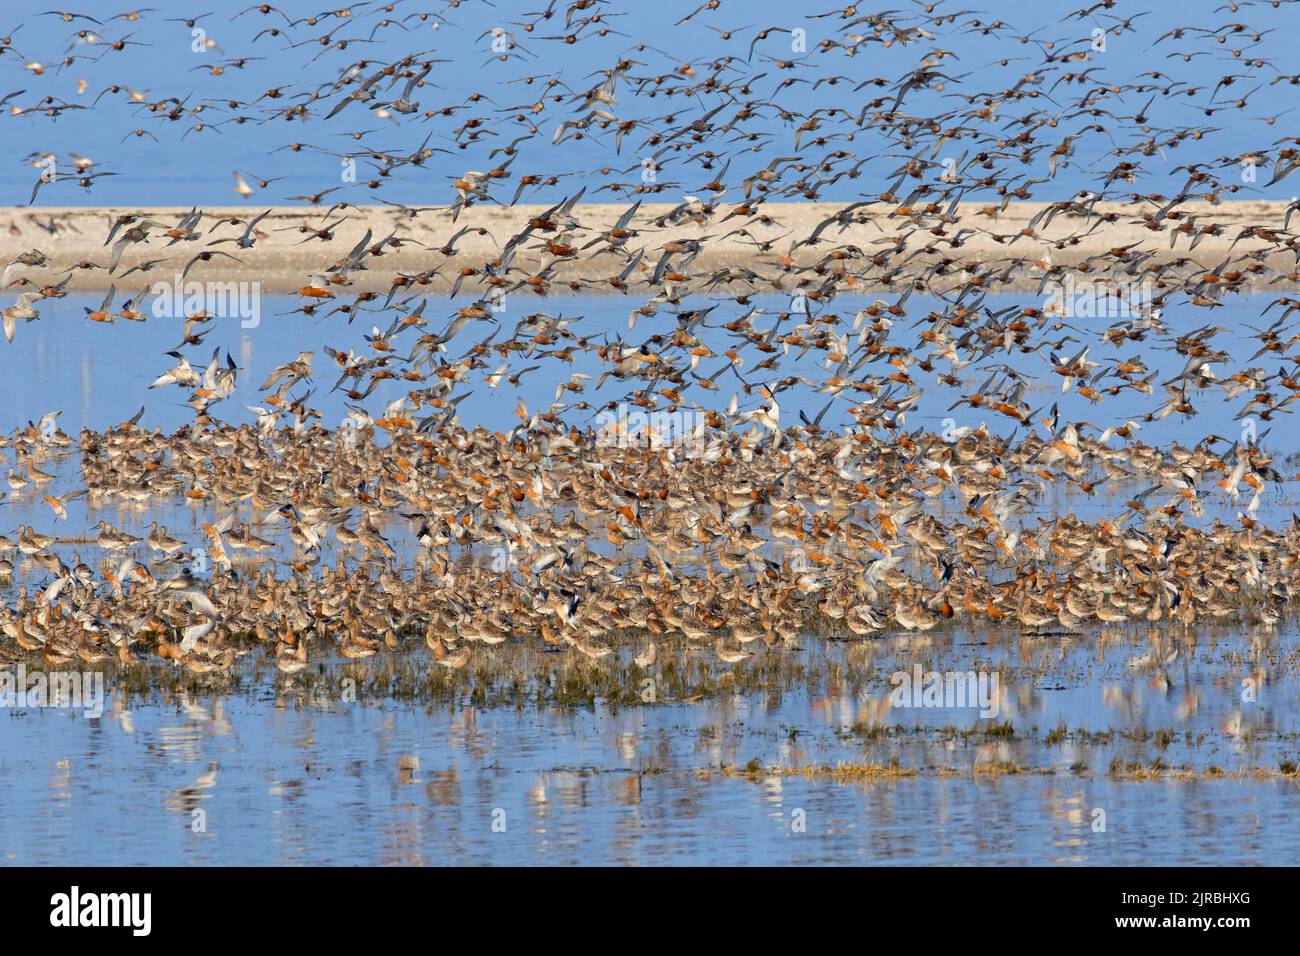 Flock of bar-tailed godwits (Limosa lapponica) and red knots (Calidris canutus)  landing in wetland / mudflat, Wadden Sea NP, North Frisia, Germany Stock Photo